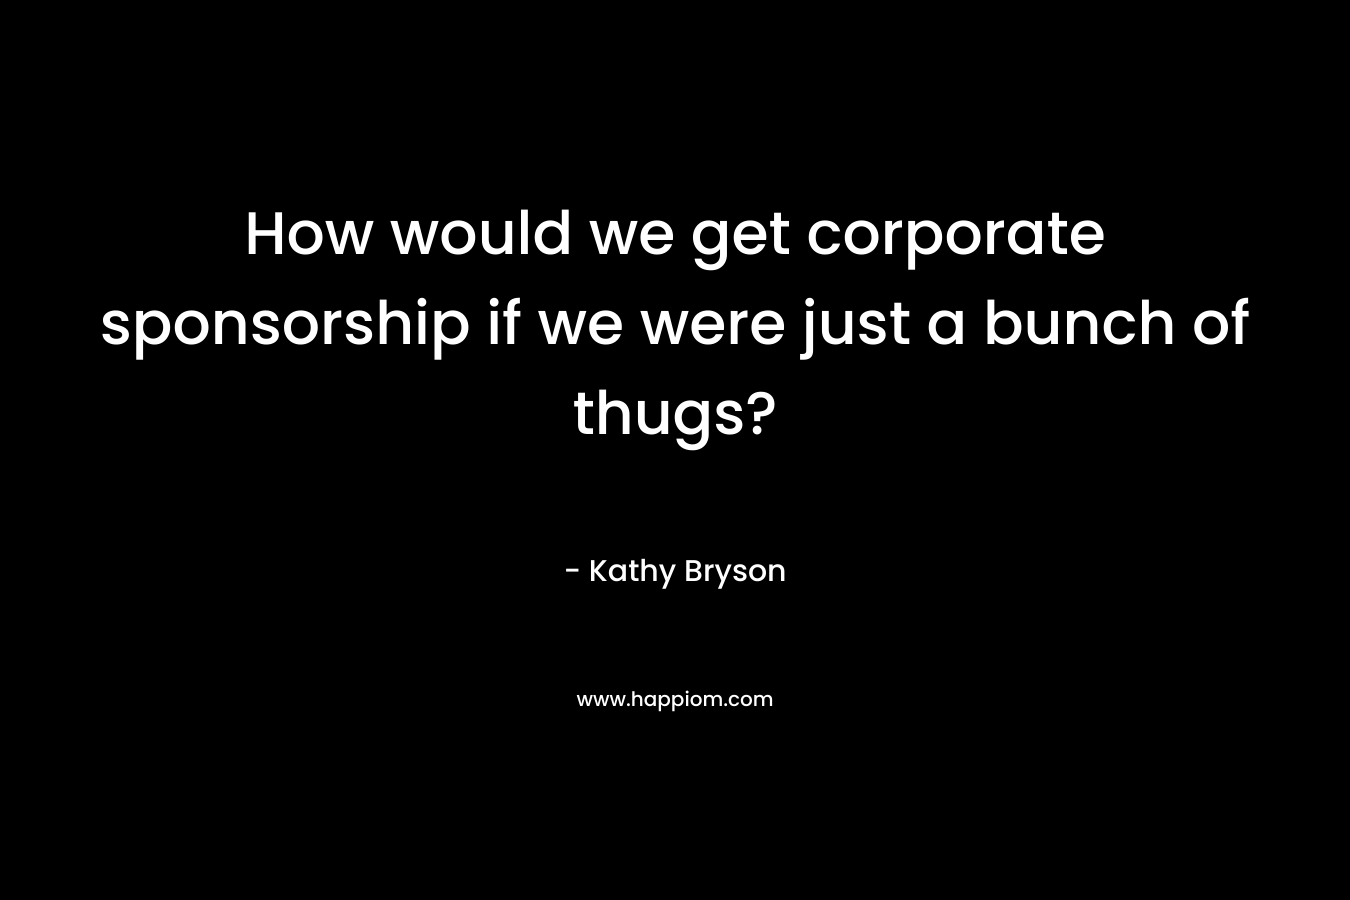 How would we get corporate sponsorship if we were just a bunch of thugs?